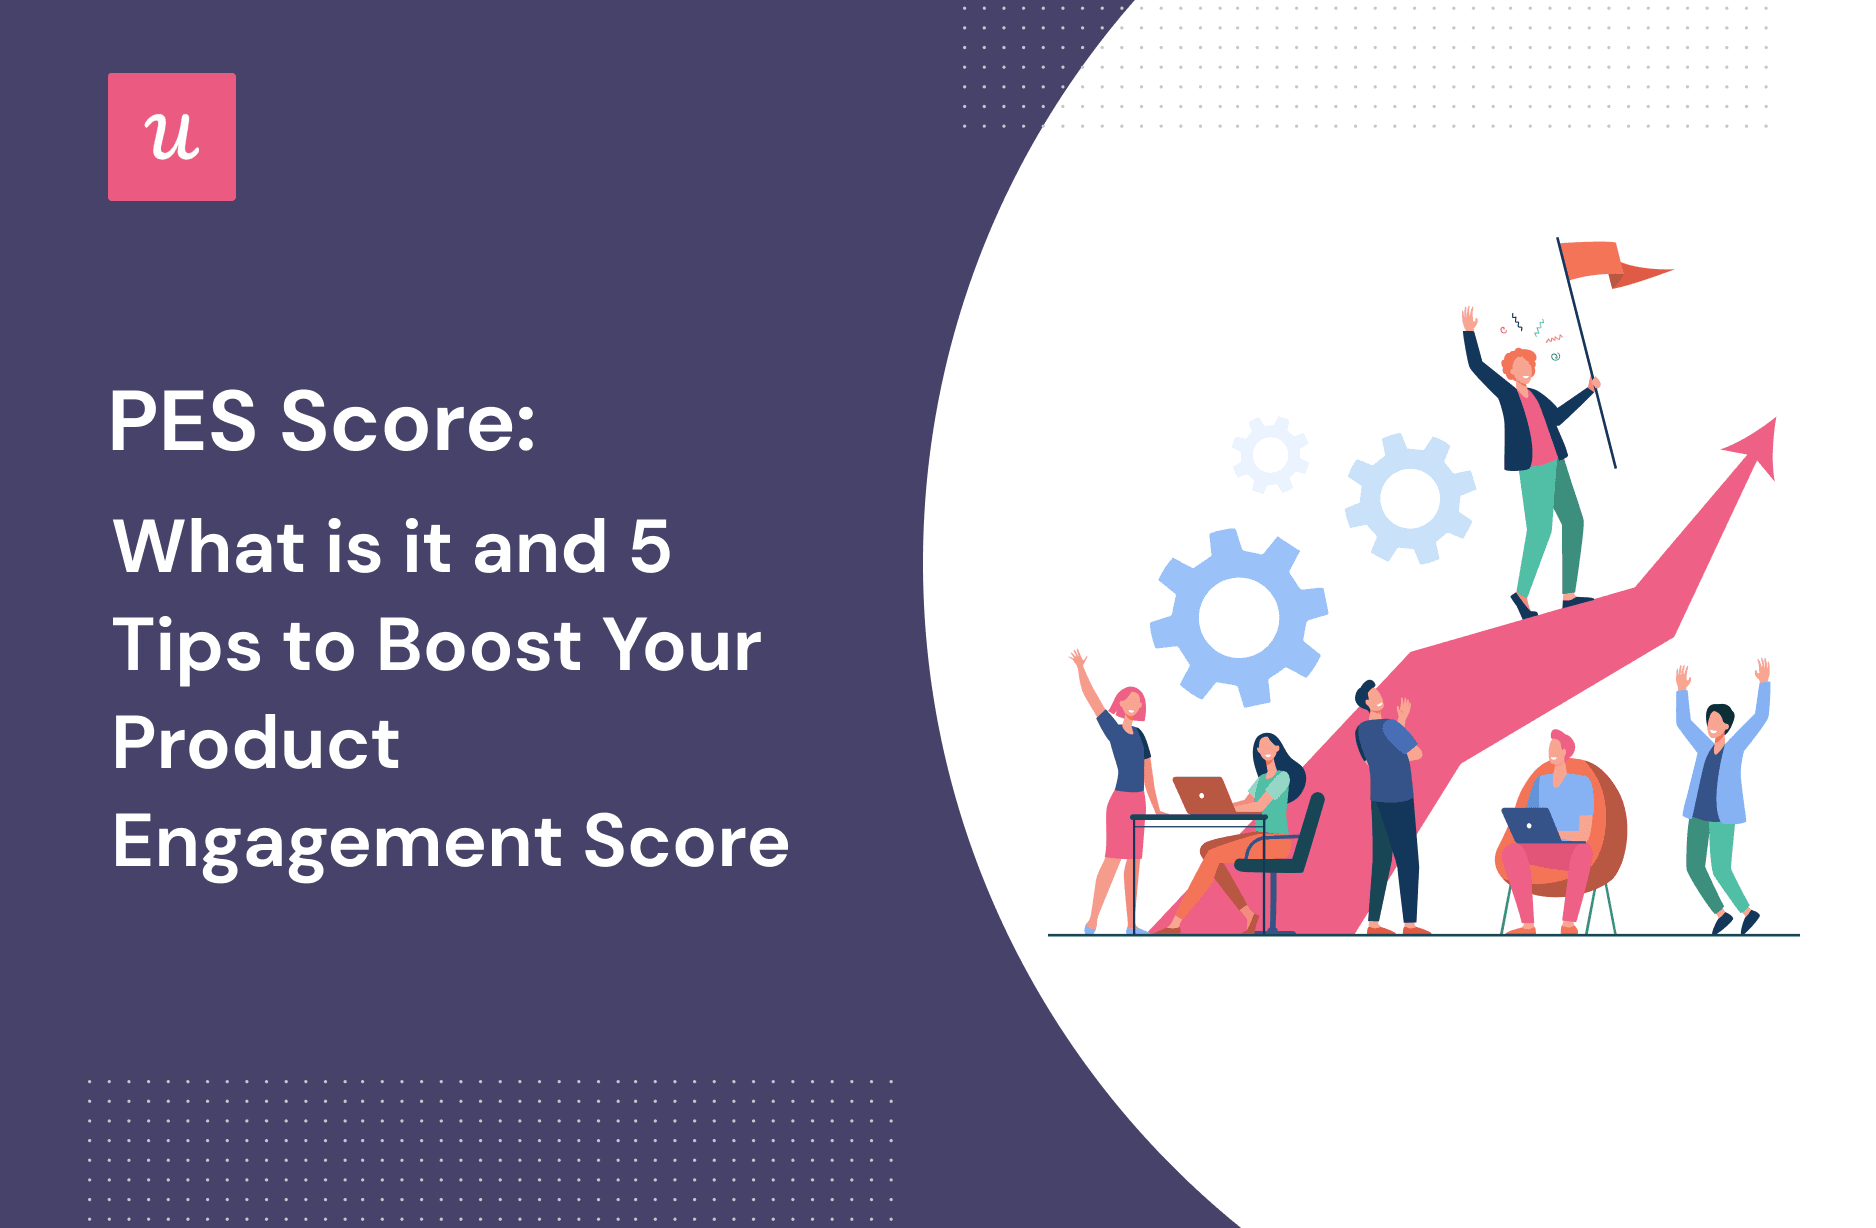 PES Score: What Is It And 5 Tips To Boost Your Product Engagement Score